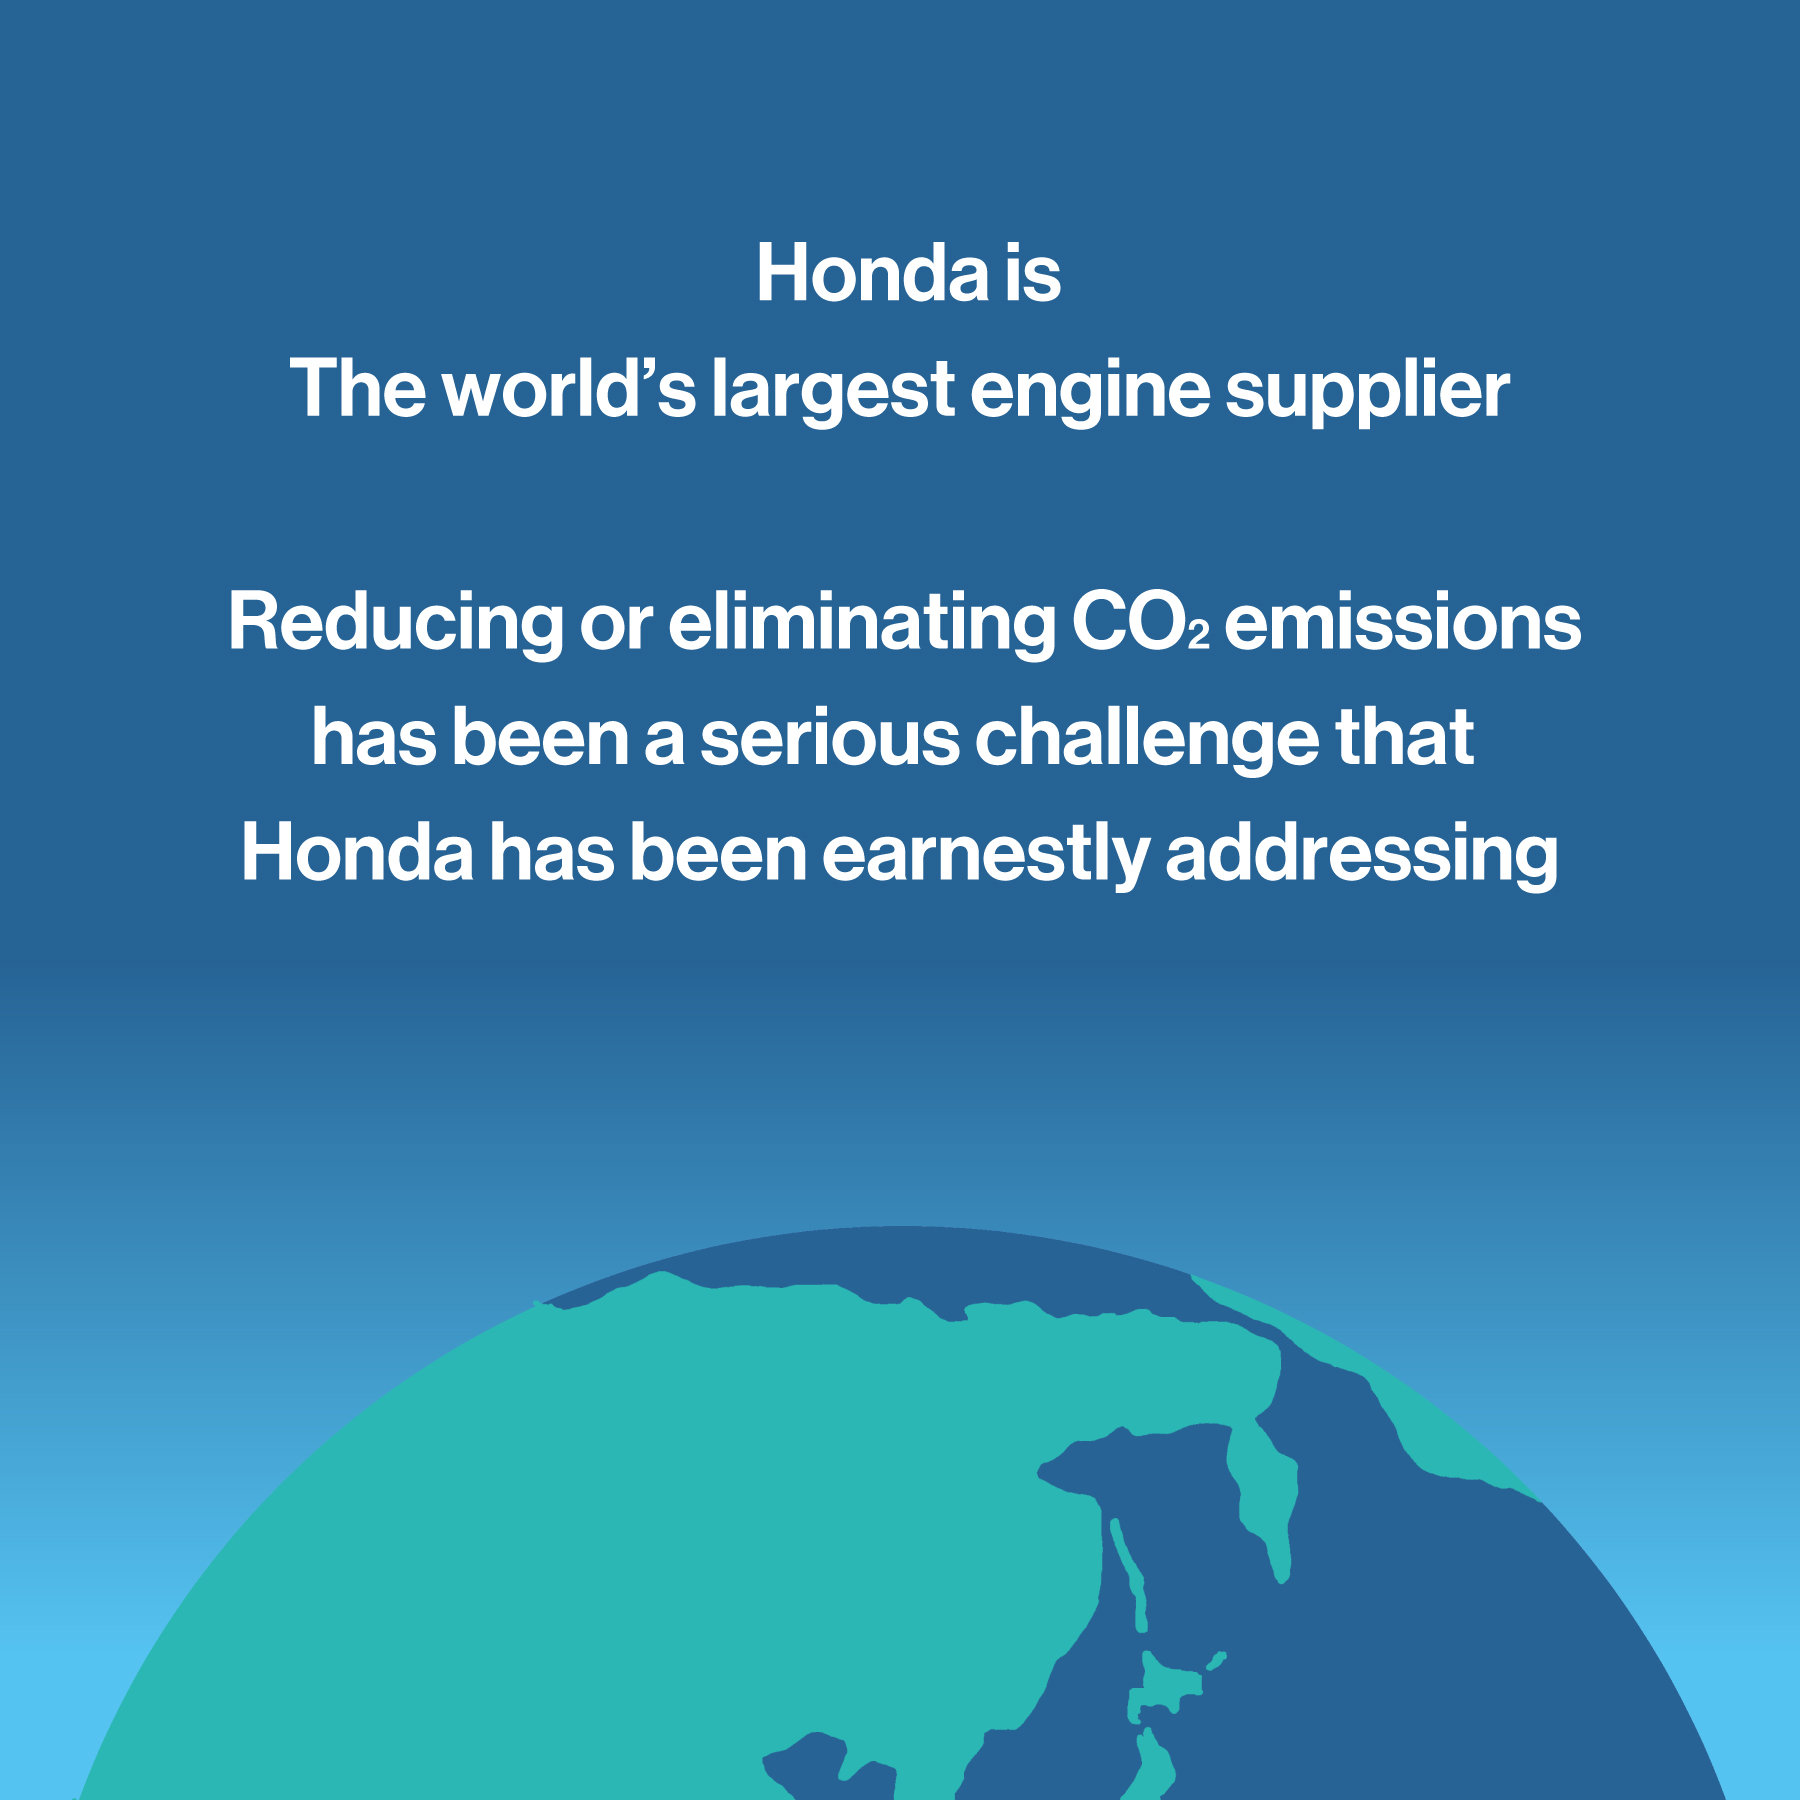 As the world’s largest engine supplier, Honda has been seriously addressing the reduction of CO2 emissions